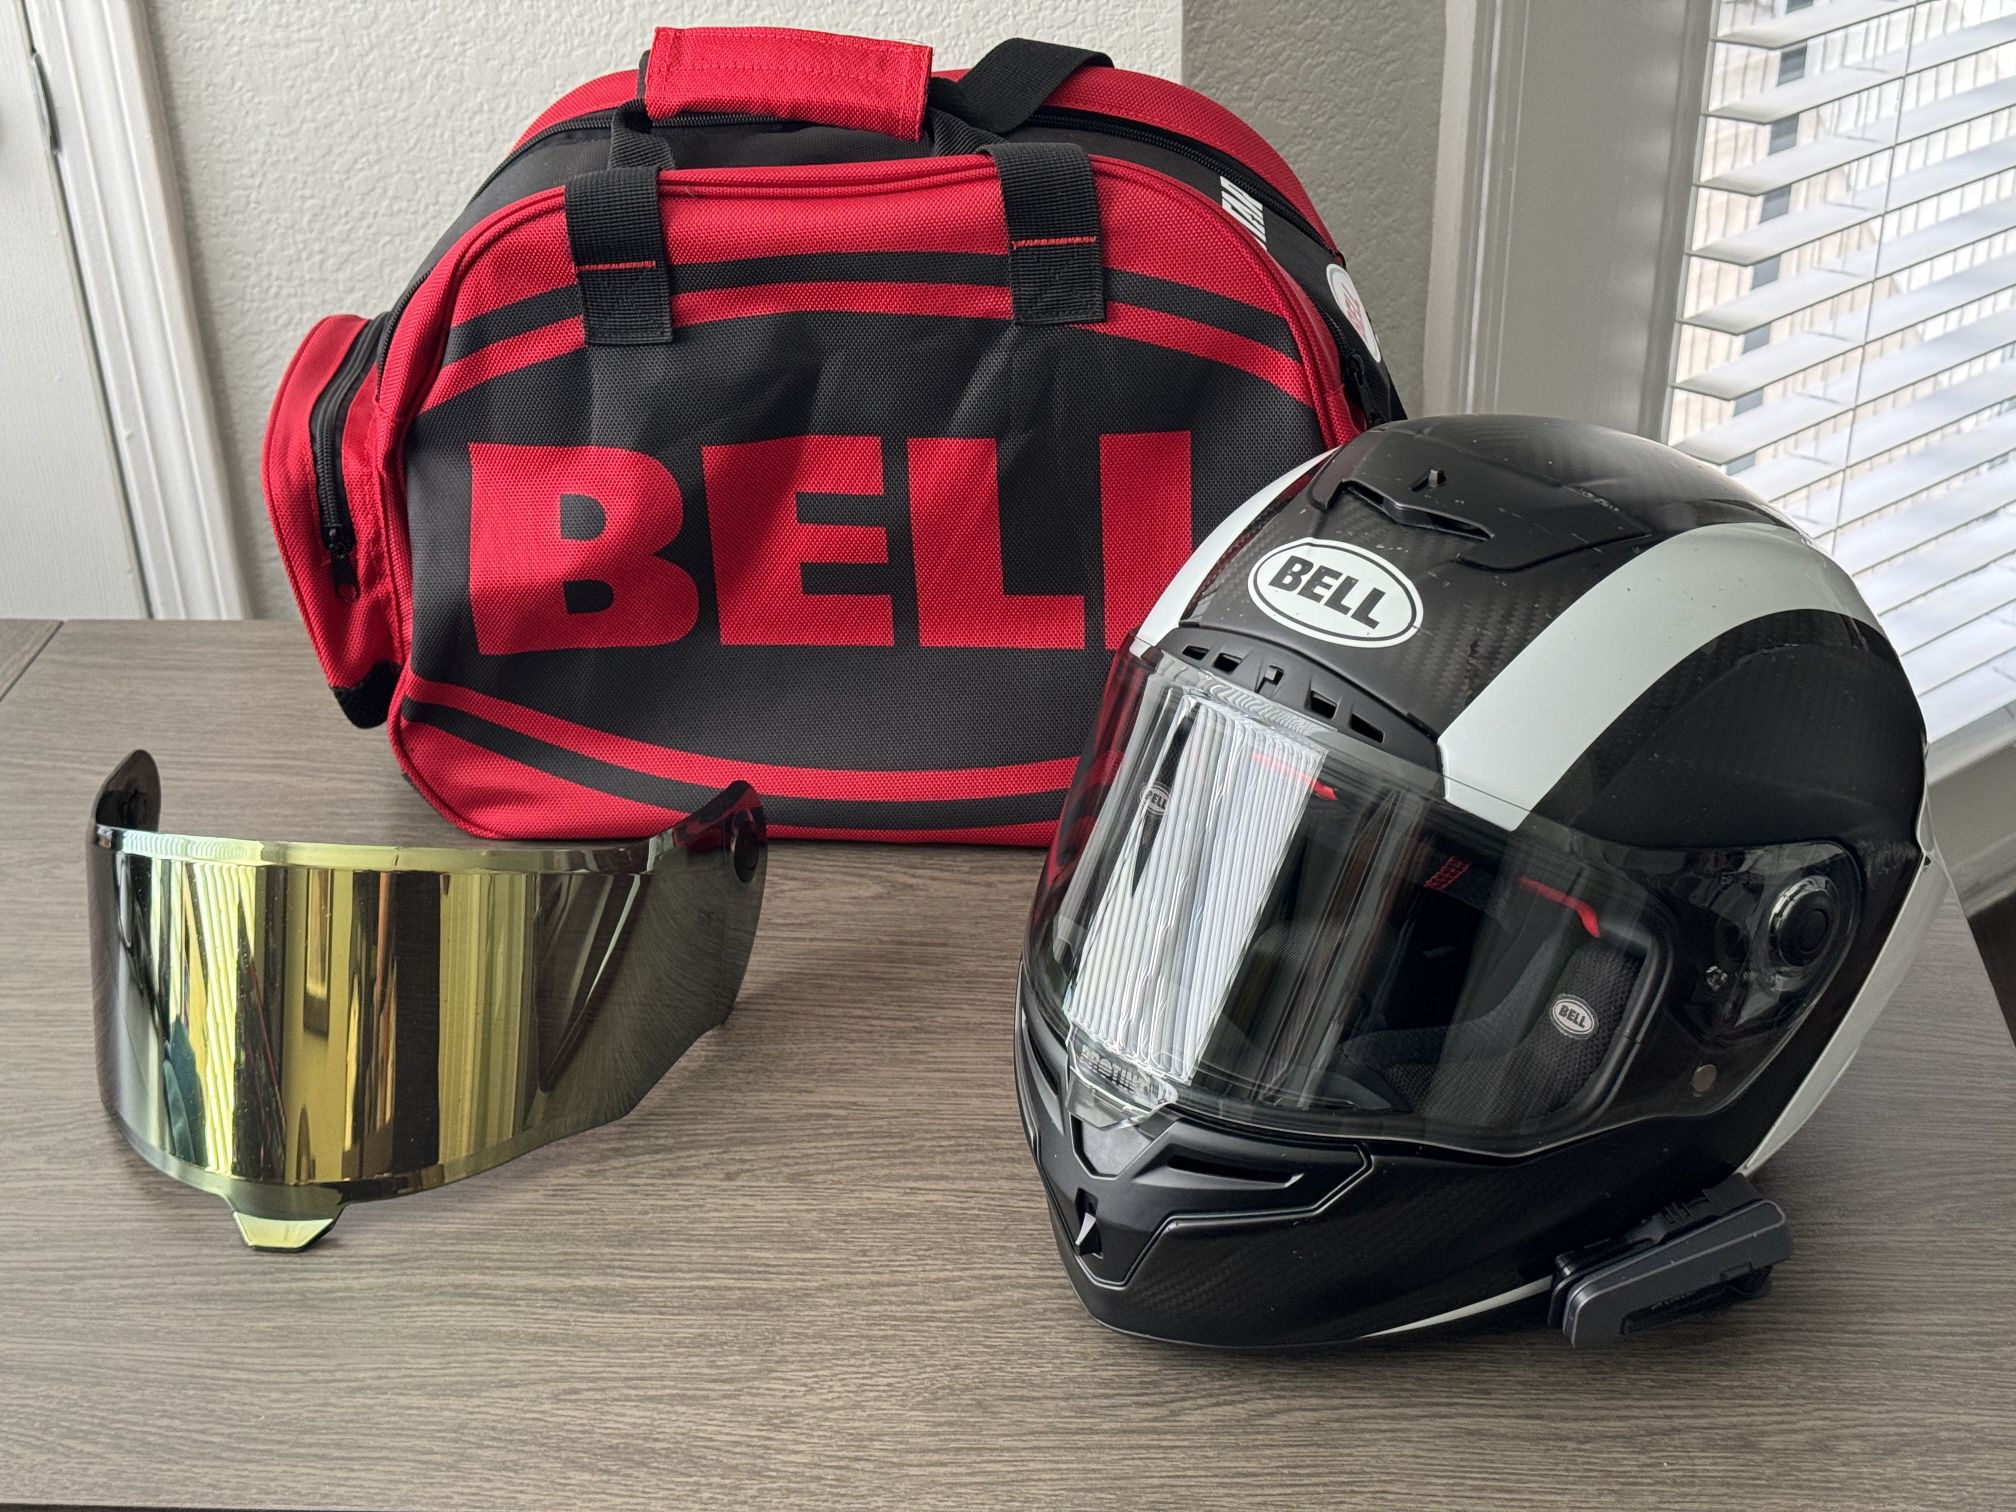 BELL Race Star DLX Motorcycle Helmet - Large (used) Includes Cardo Packtalk Edge Comm System